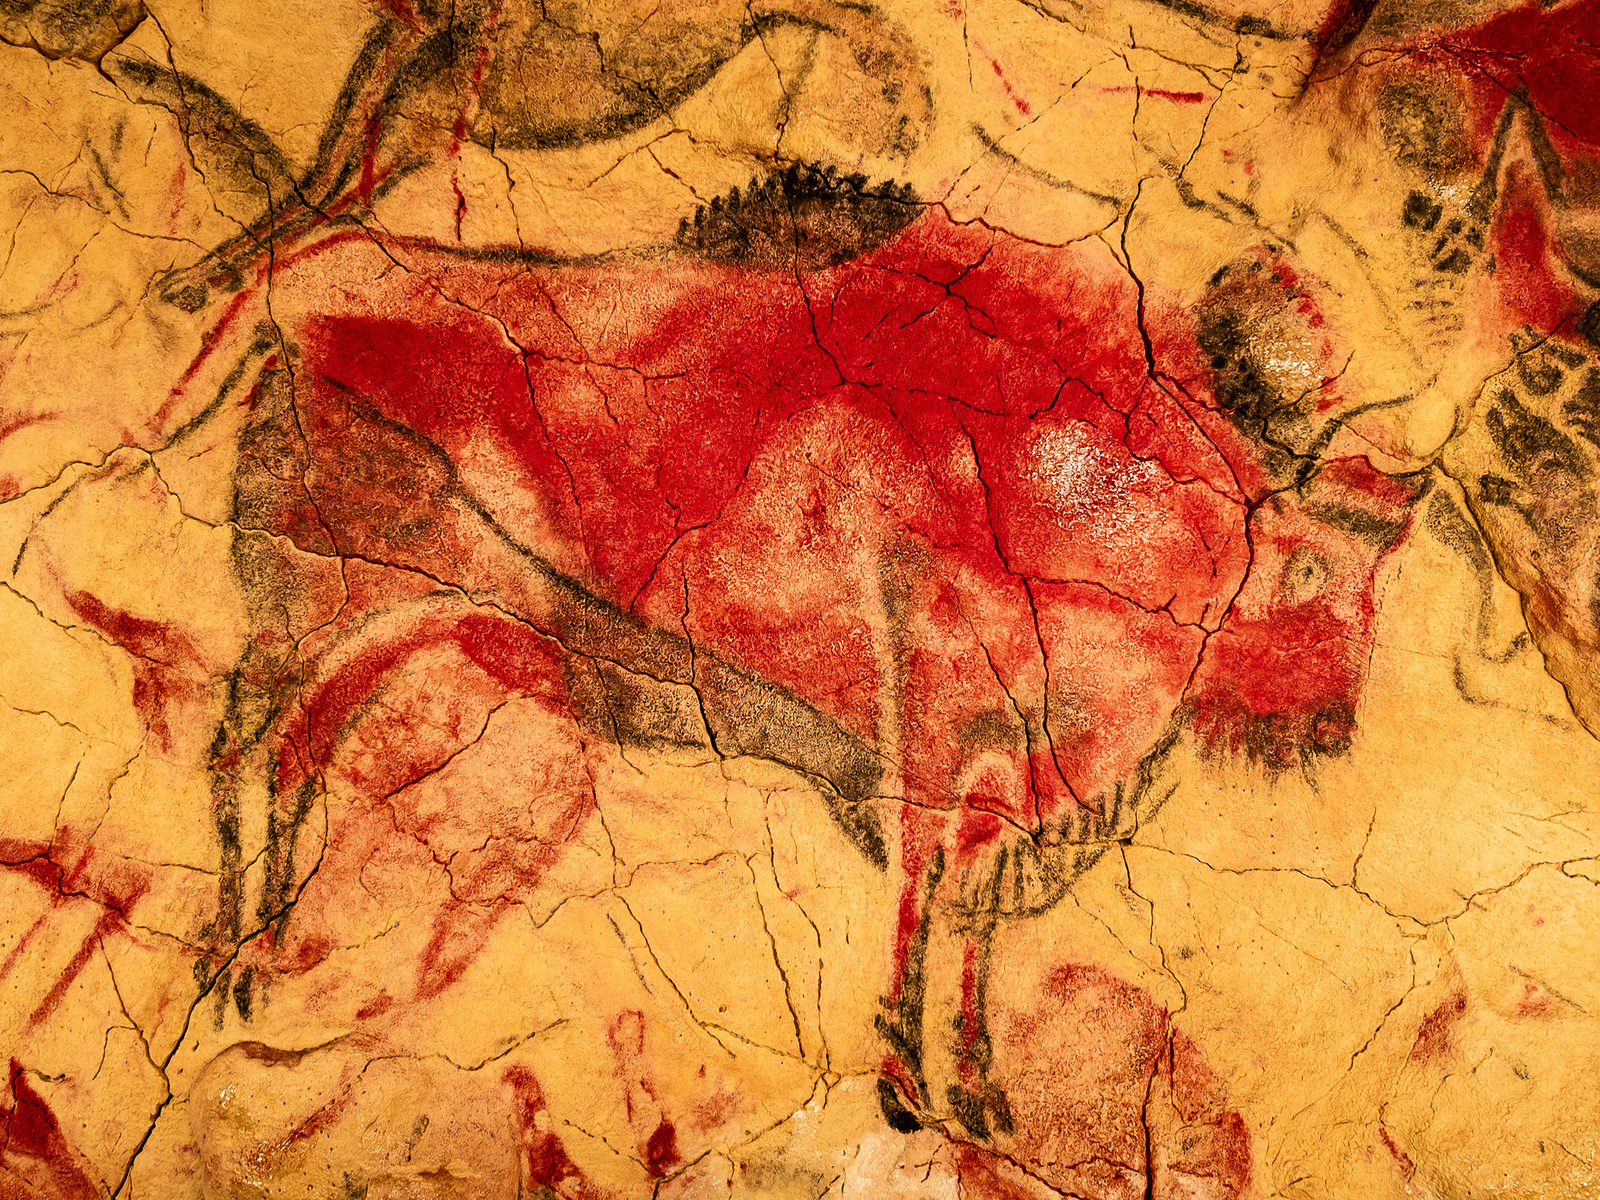 paleolithic rock painting, red bison, altamira cave, spain